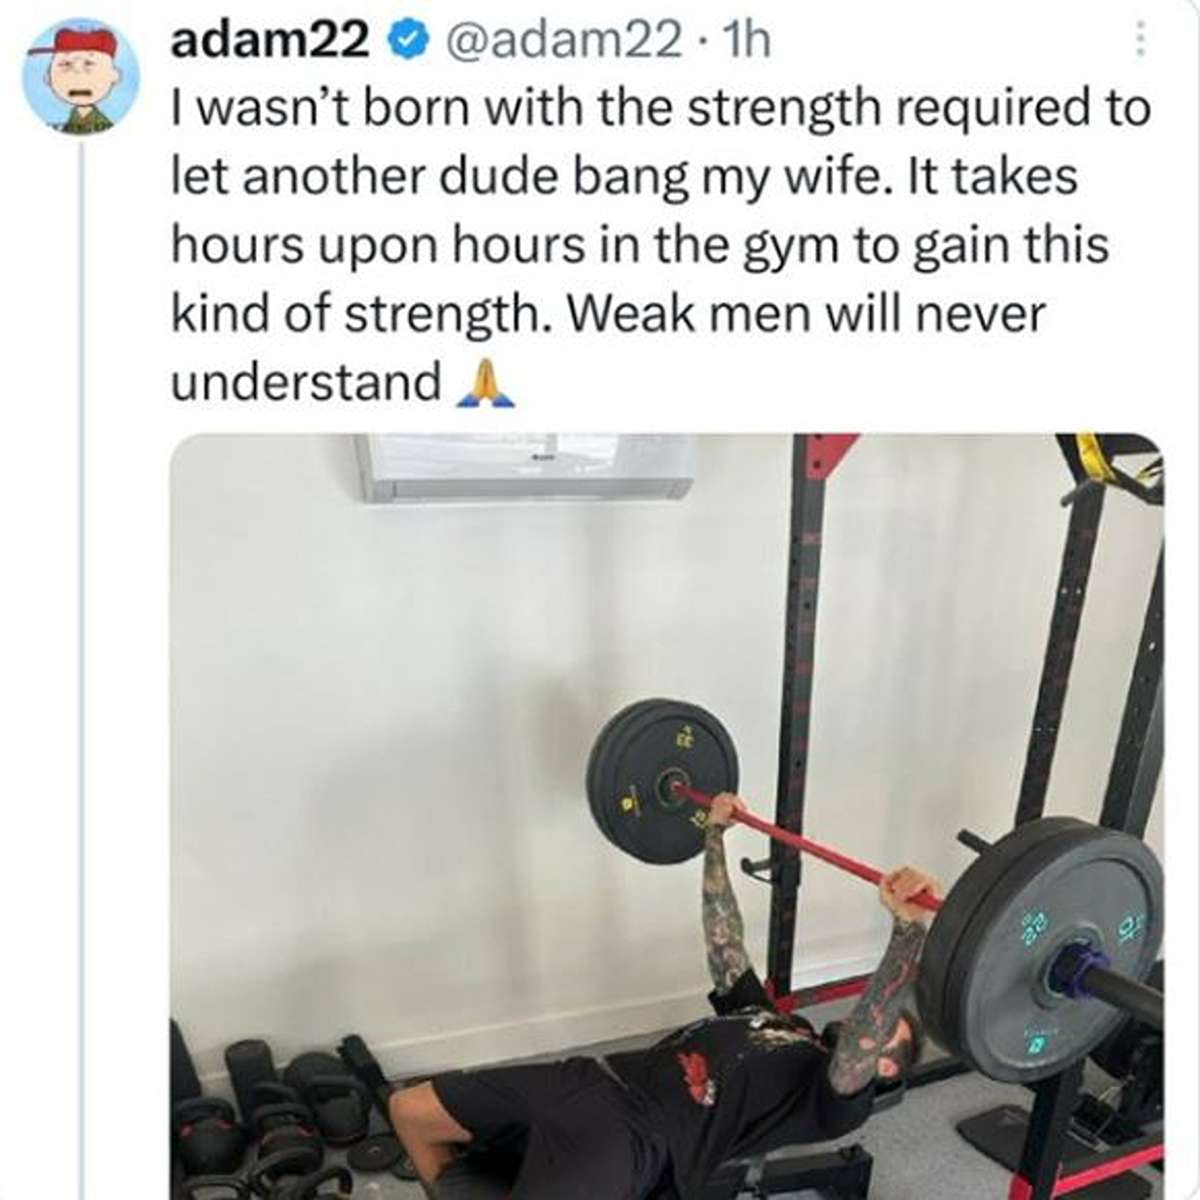 delusional people - gym - adam22 .1h I wasn't born with the strength required to let another dude bang my wife. It takes hours upon hours in the gym to gain this kind of strength. Weak men will never understand 22 An